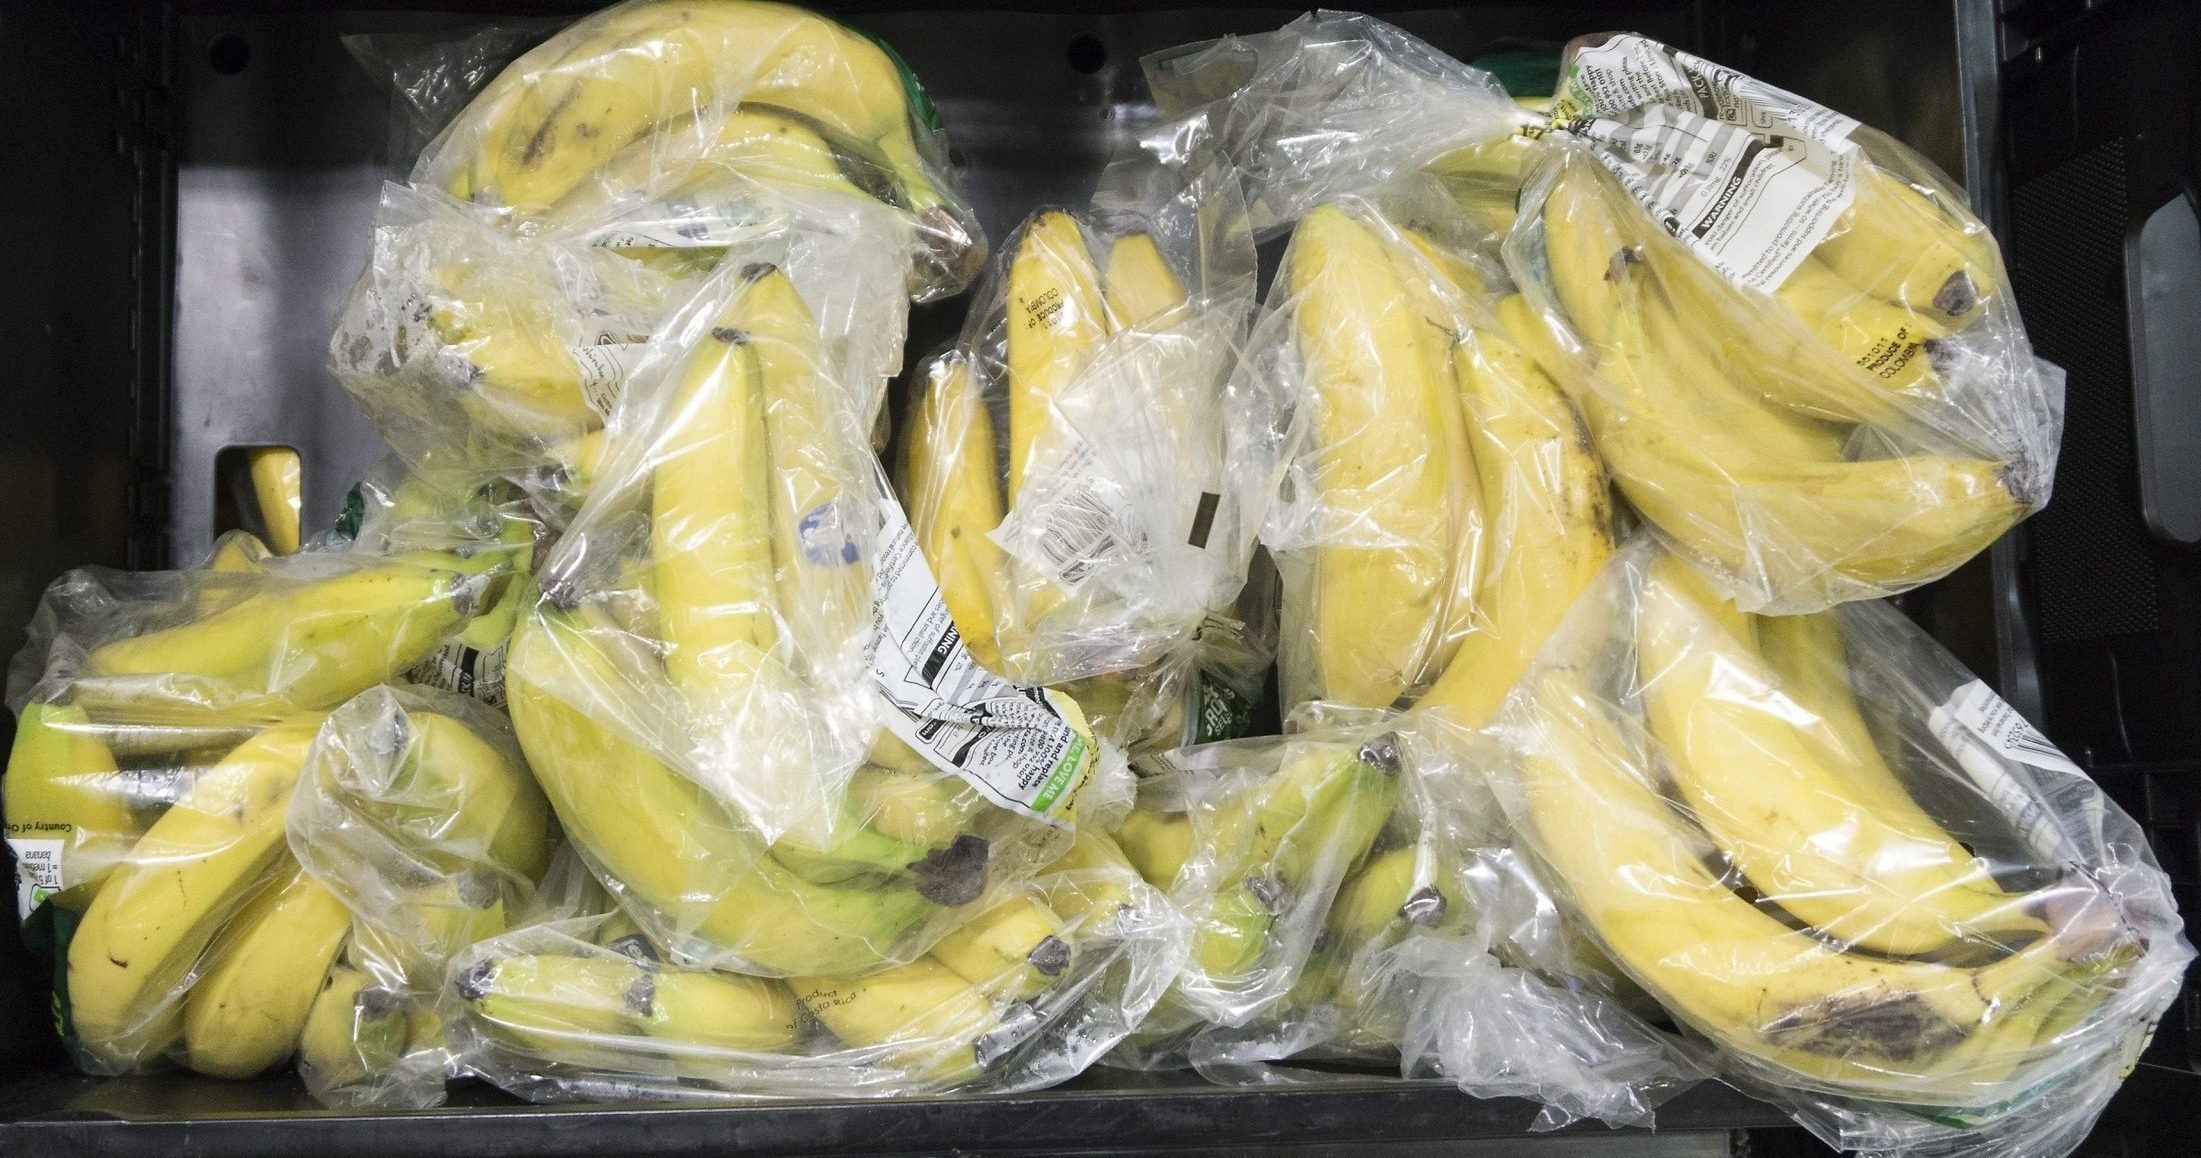 How To Make Your Banana Bunch Go Further